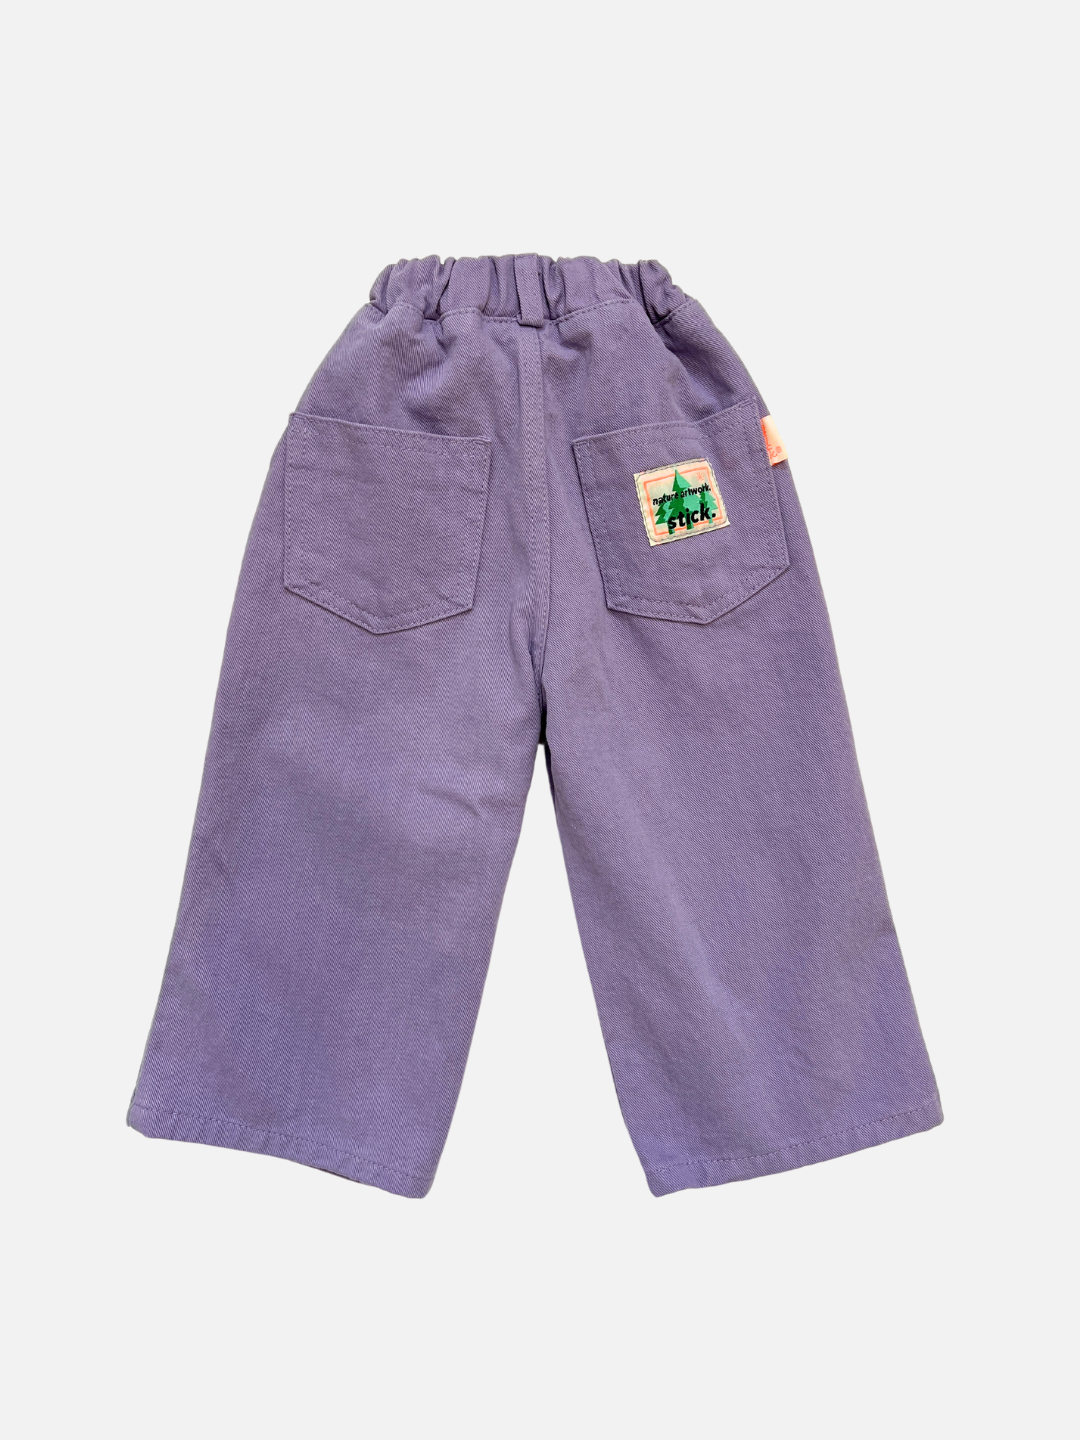 A back view of kid's Grape Jeans with elastic waist and Stick logo on right back pocket